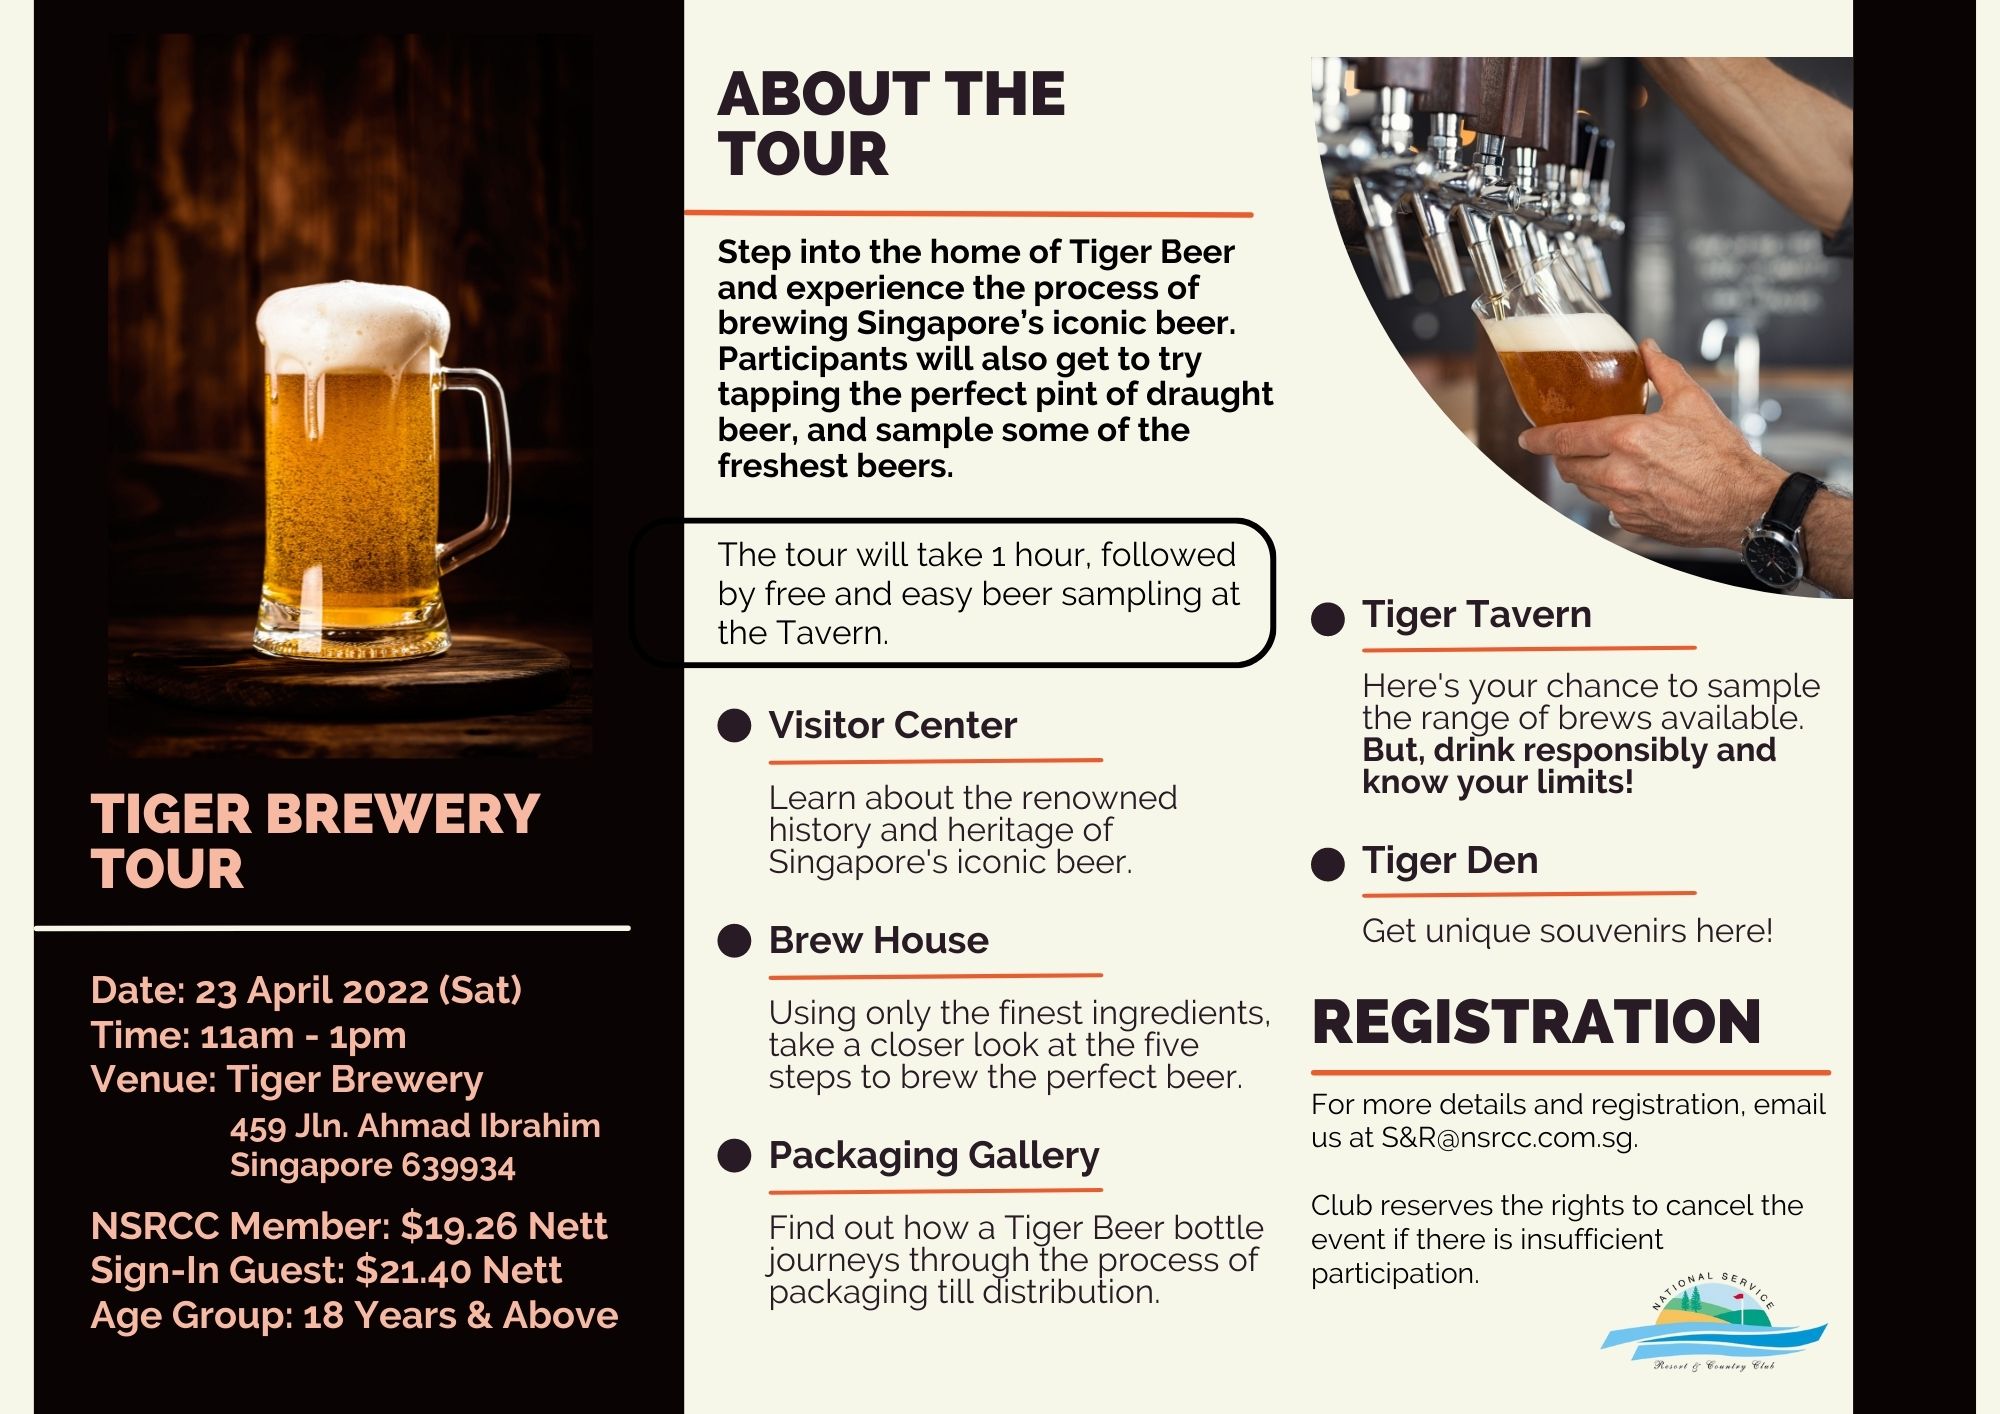 tiger brewery tour booking